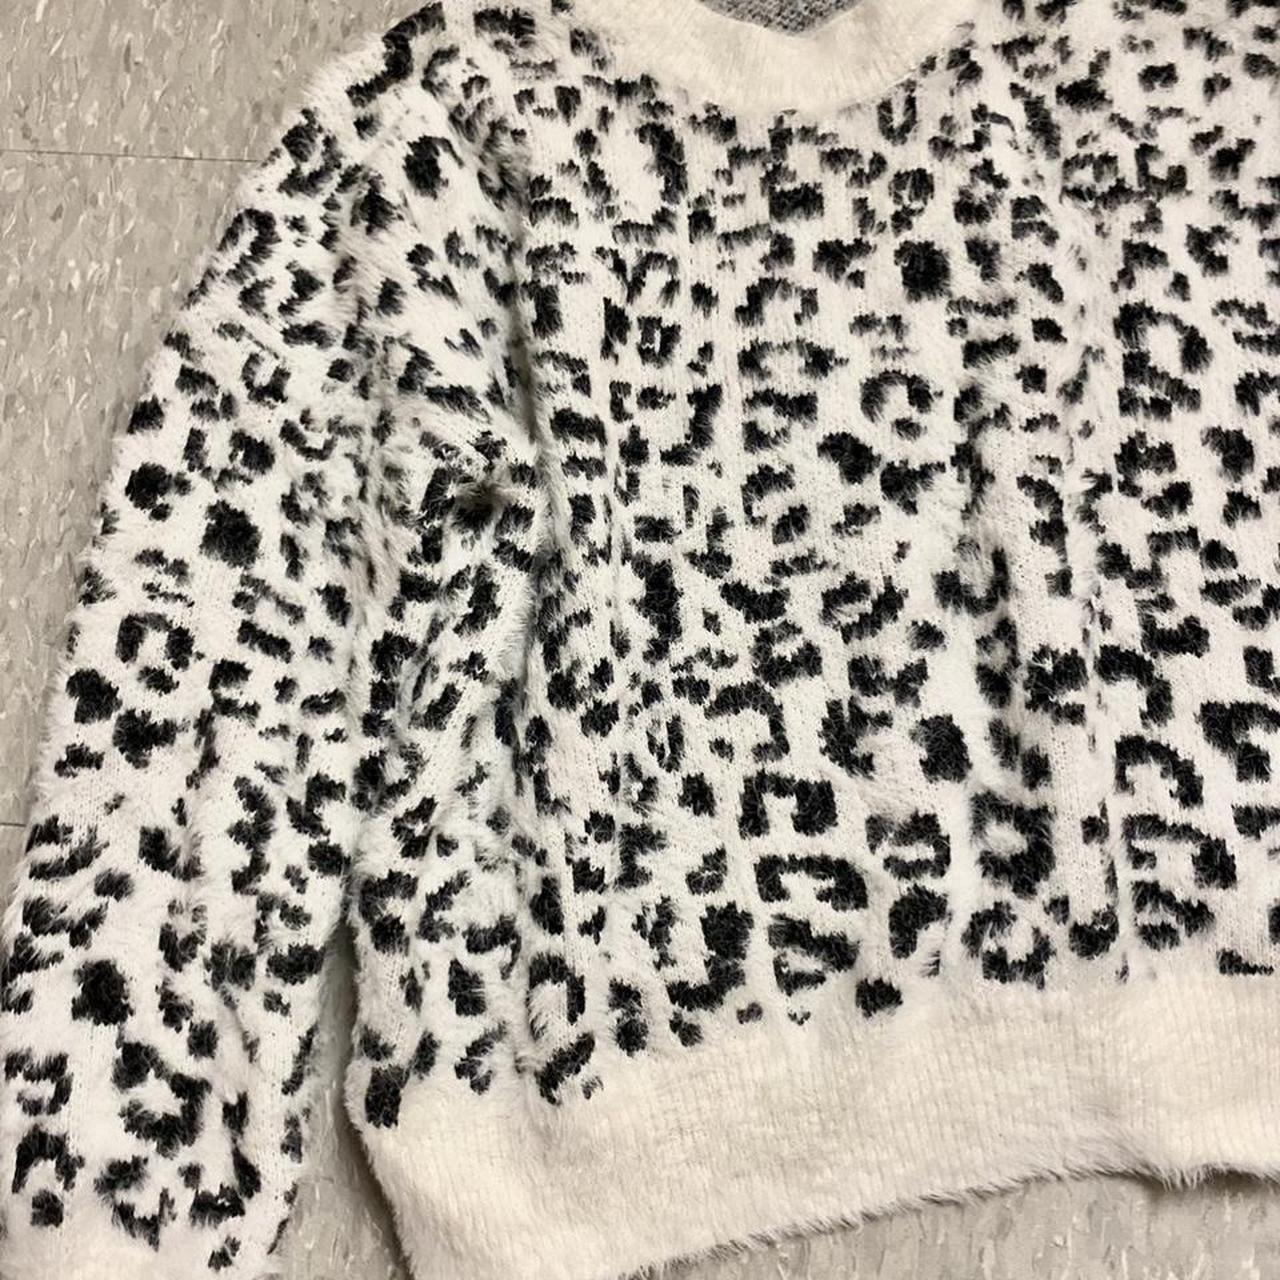 Product Image 2 - Fuzzy Leopard Sweater, XL but